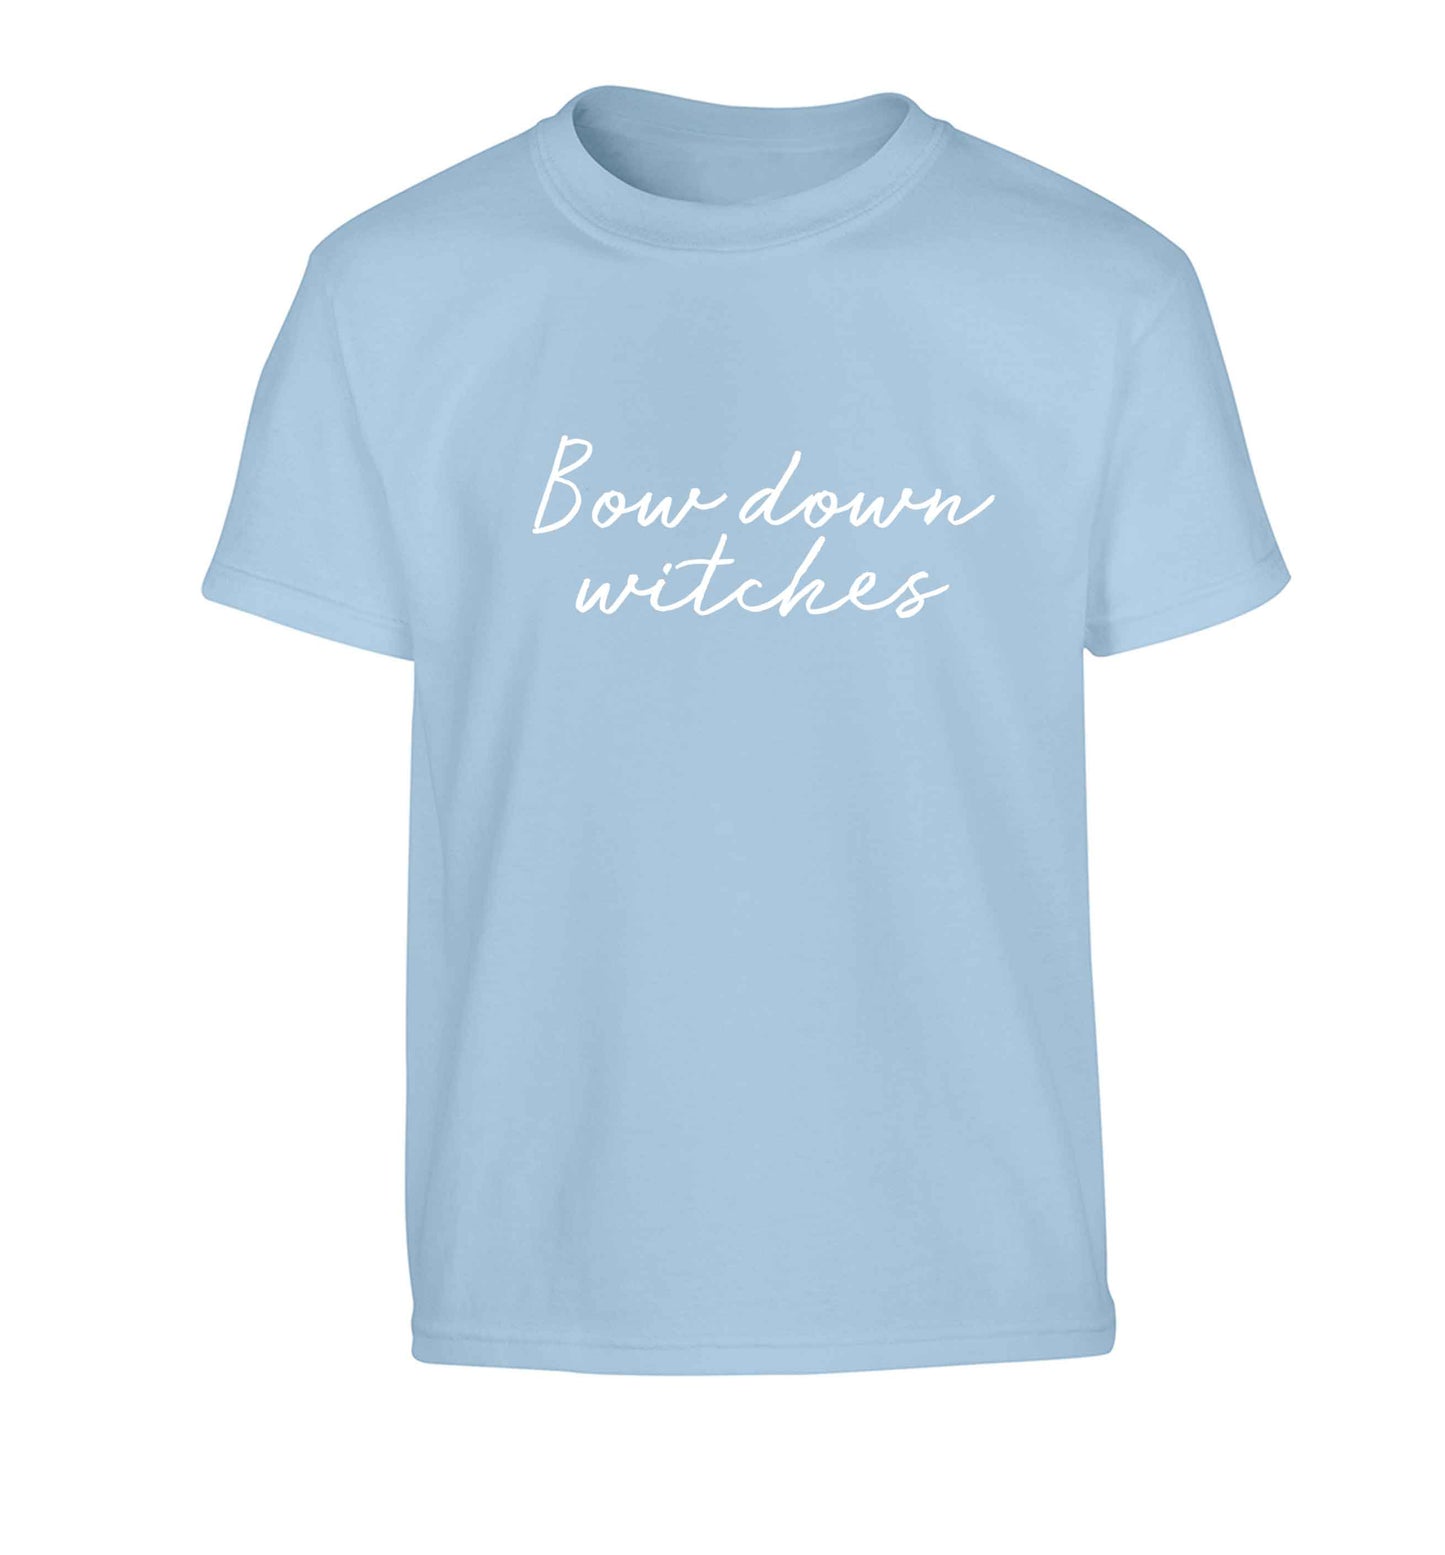 Bow down witches Children's light blue Tshirt 12-13 Years